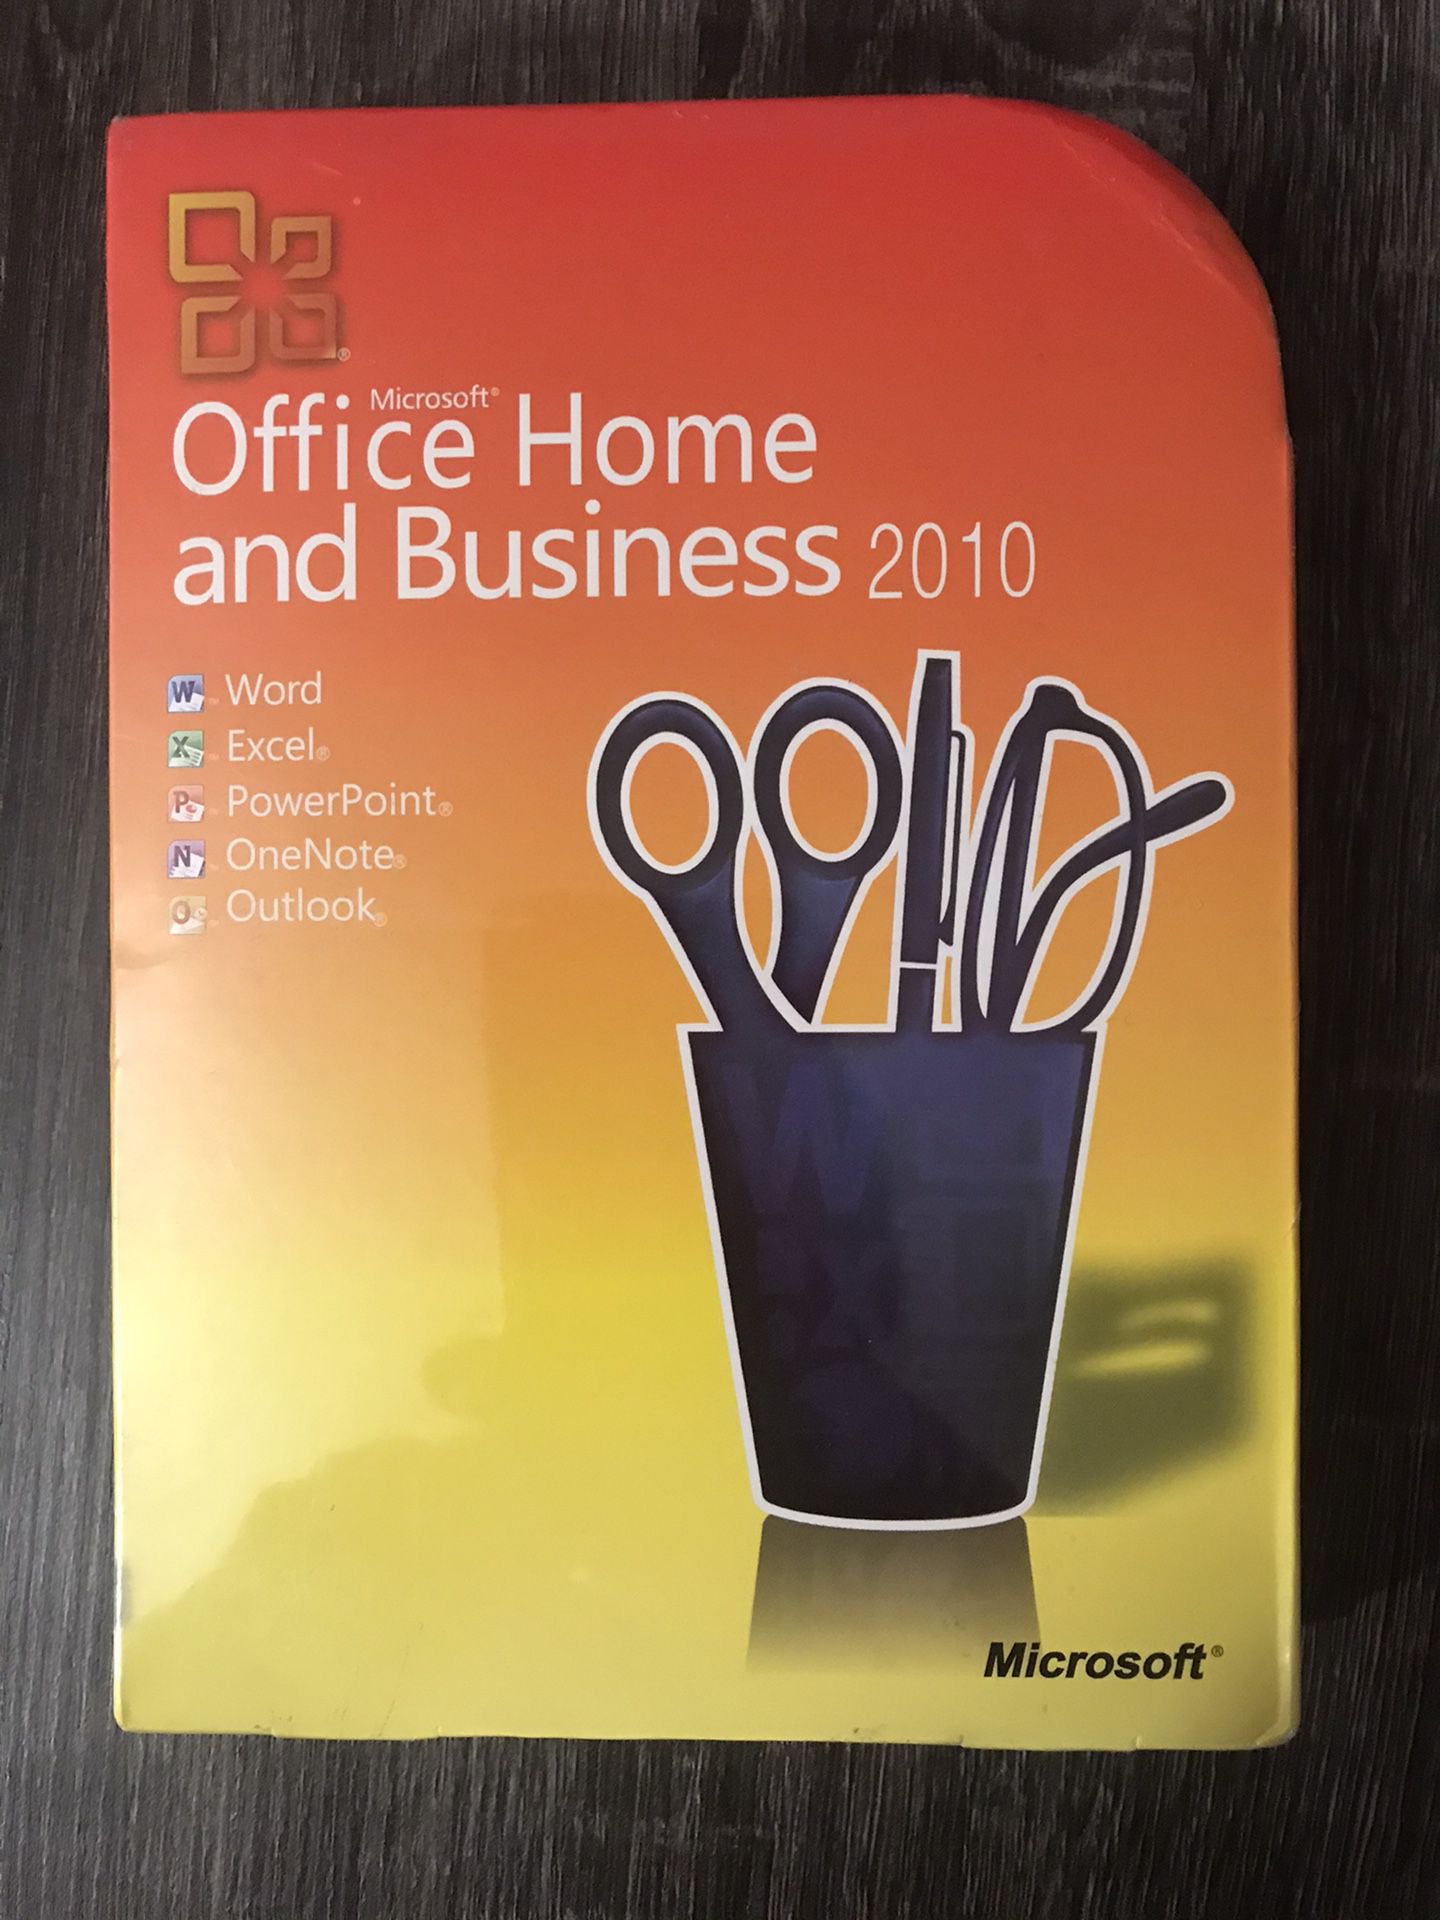 Office Soft Ware Home and Business 2010